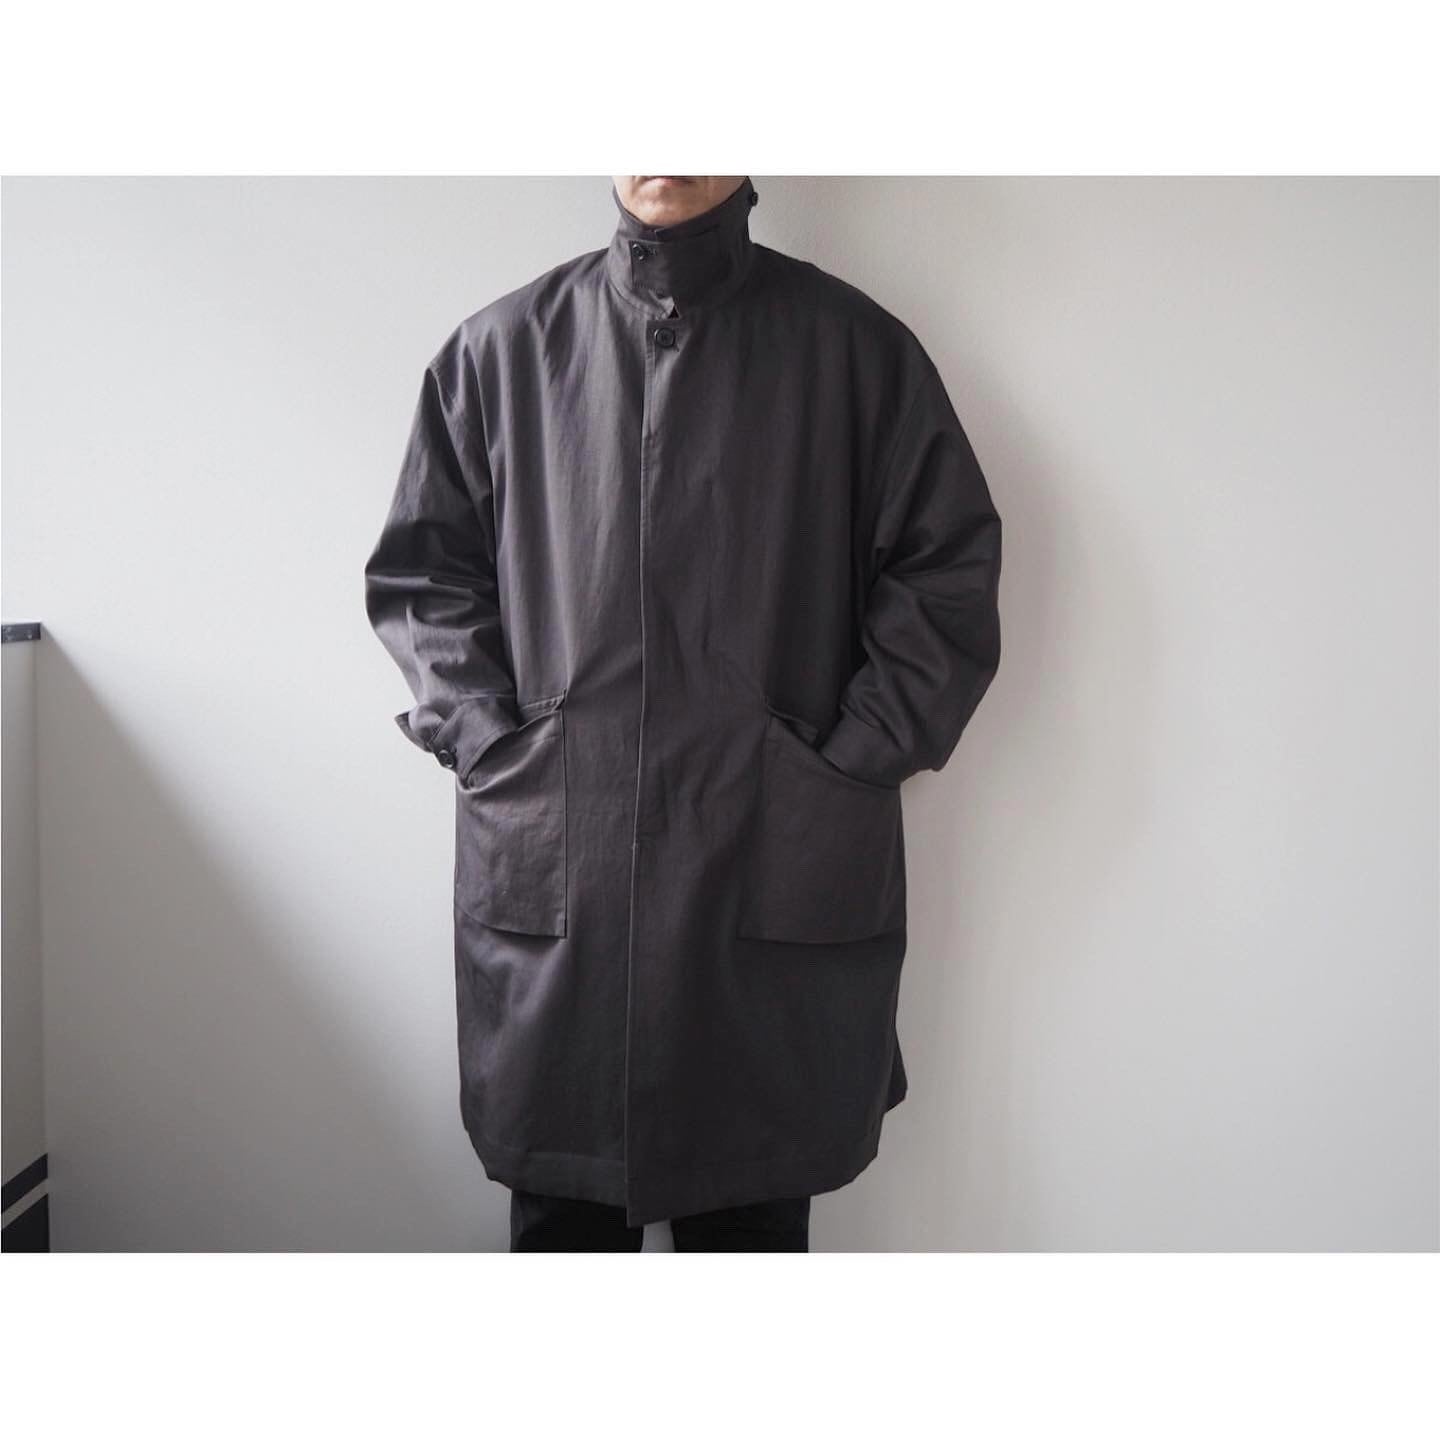 STILL BY HAND(スティル バイ ハンド) Cotton Linen Liner Soutien Collar Coat  AUTHENTIC Life Store